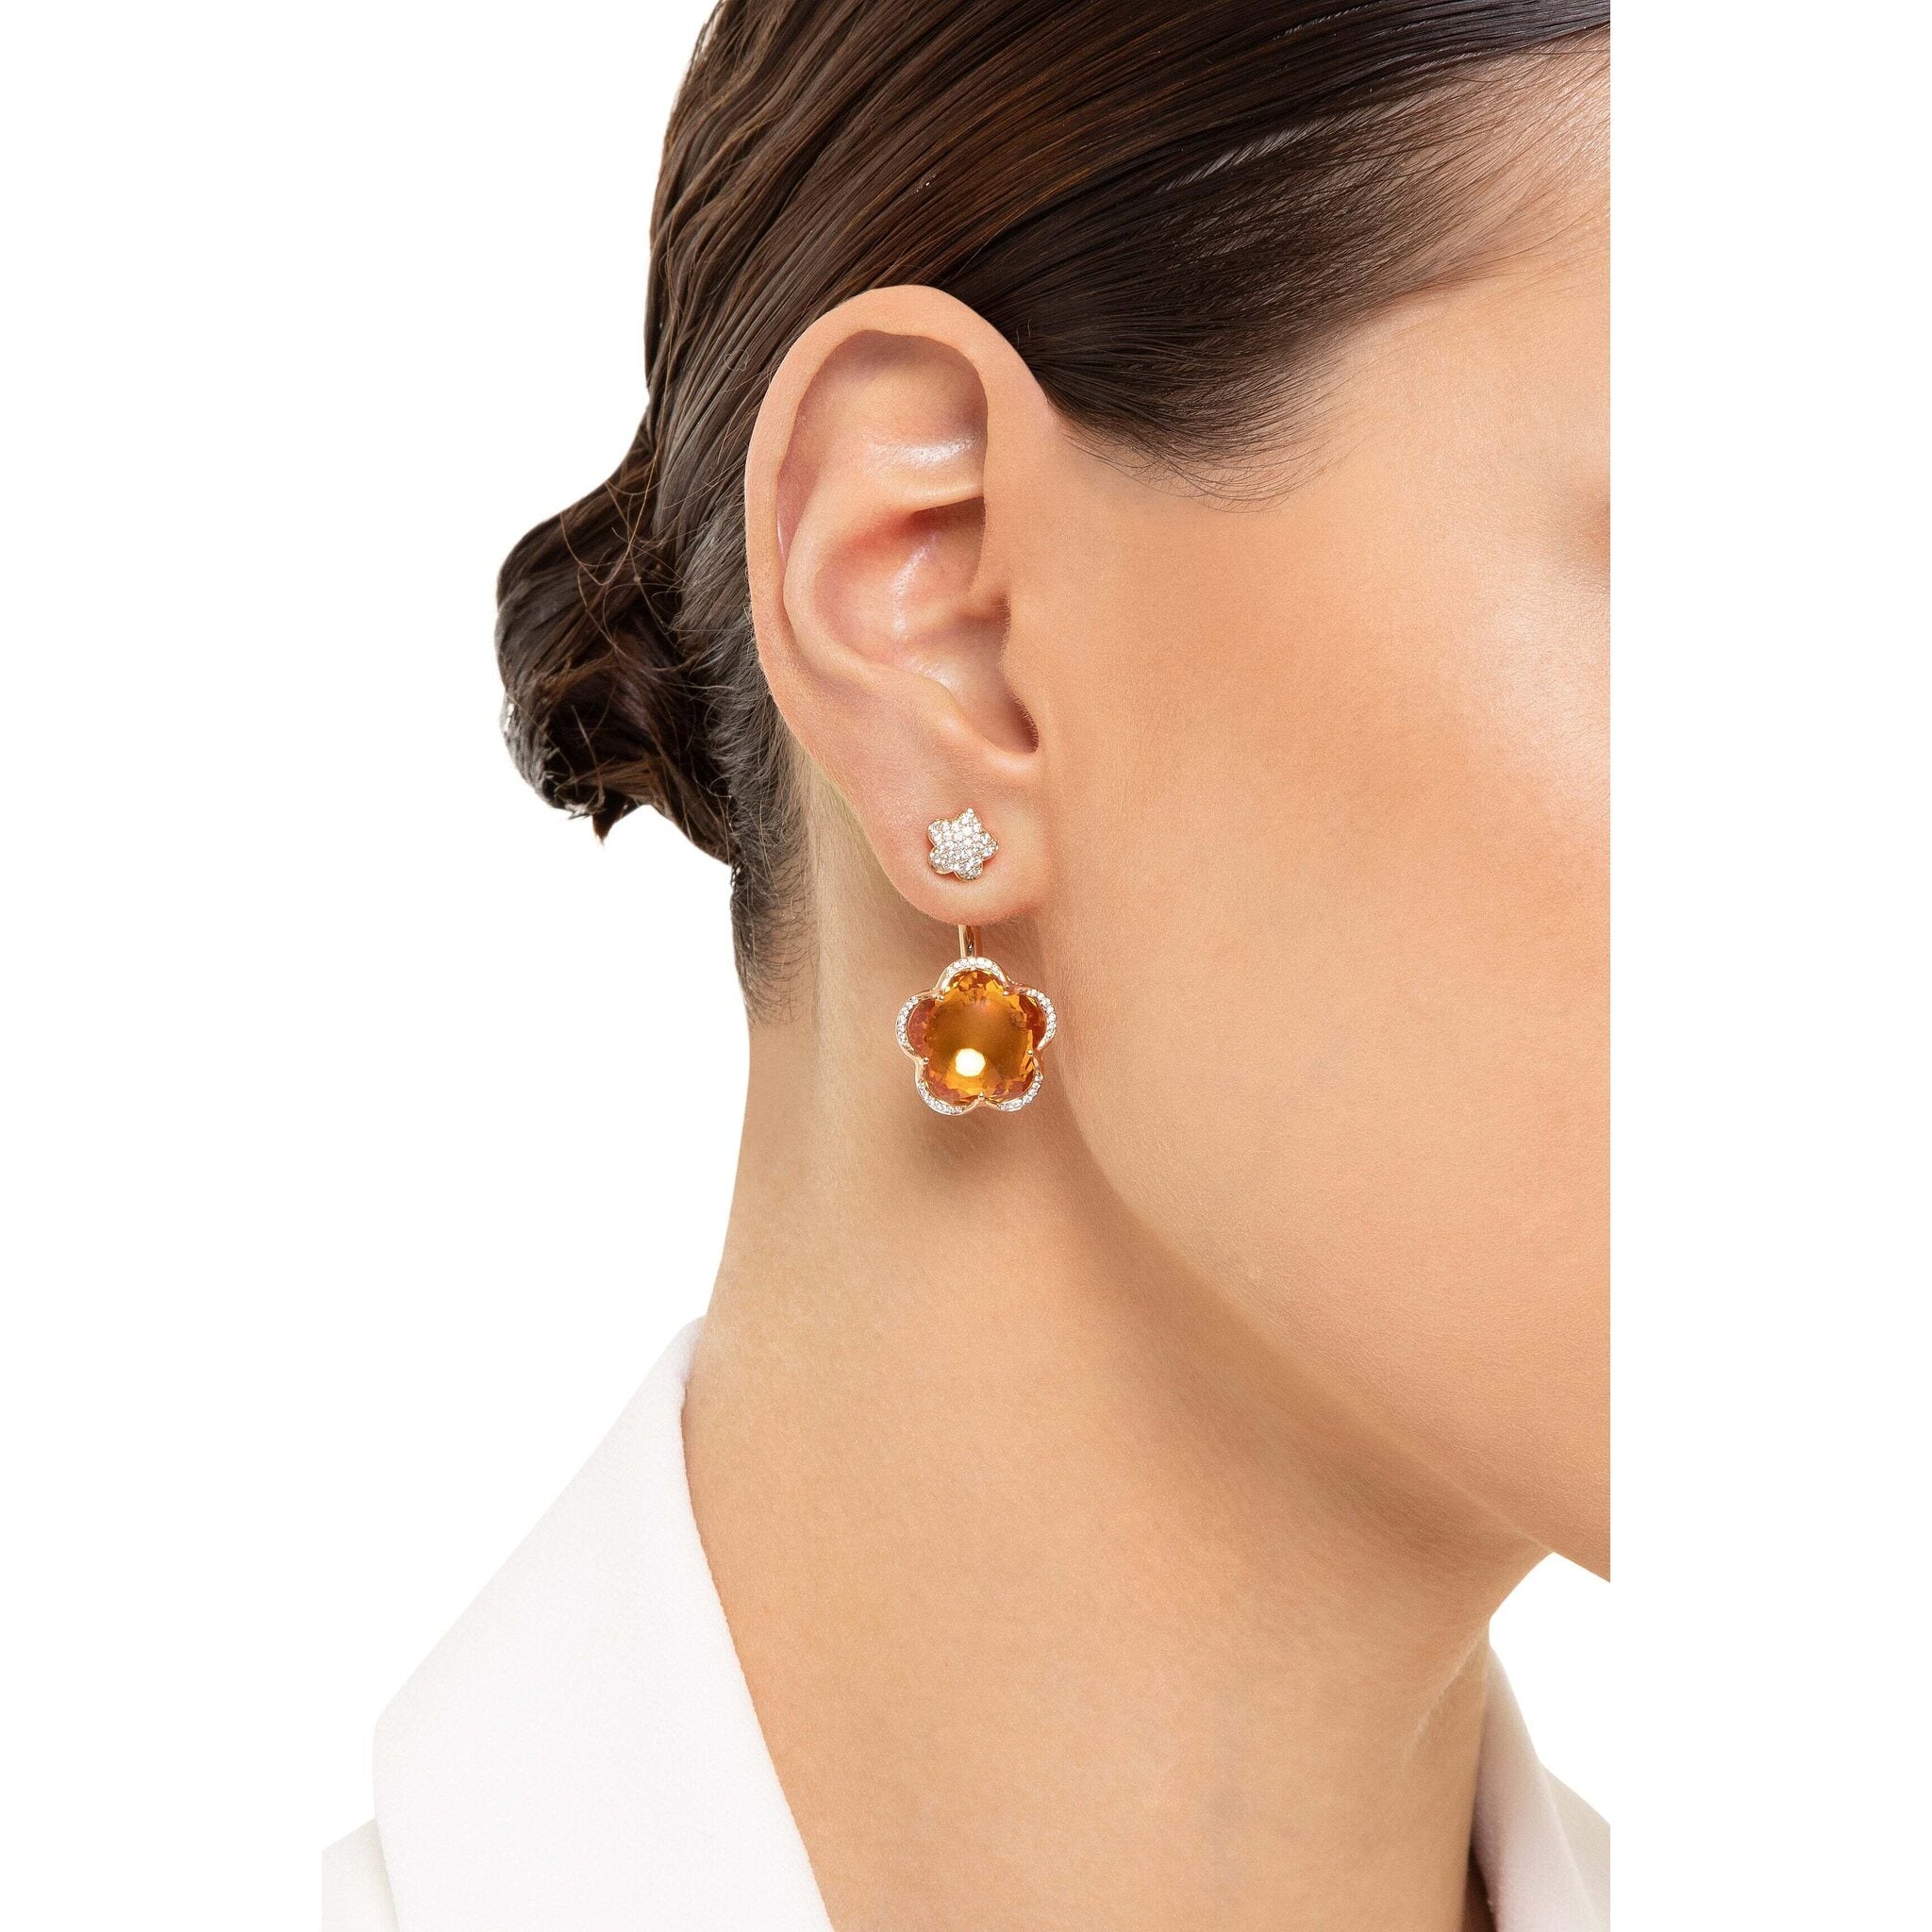 Pasquale Bruni - Bon Ton Divine Piercing Earrings in 18k Rose Gold with  Citrine and Diamonds